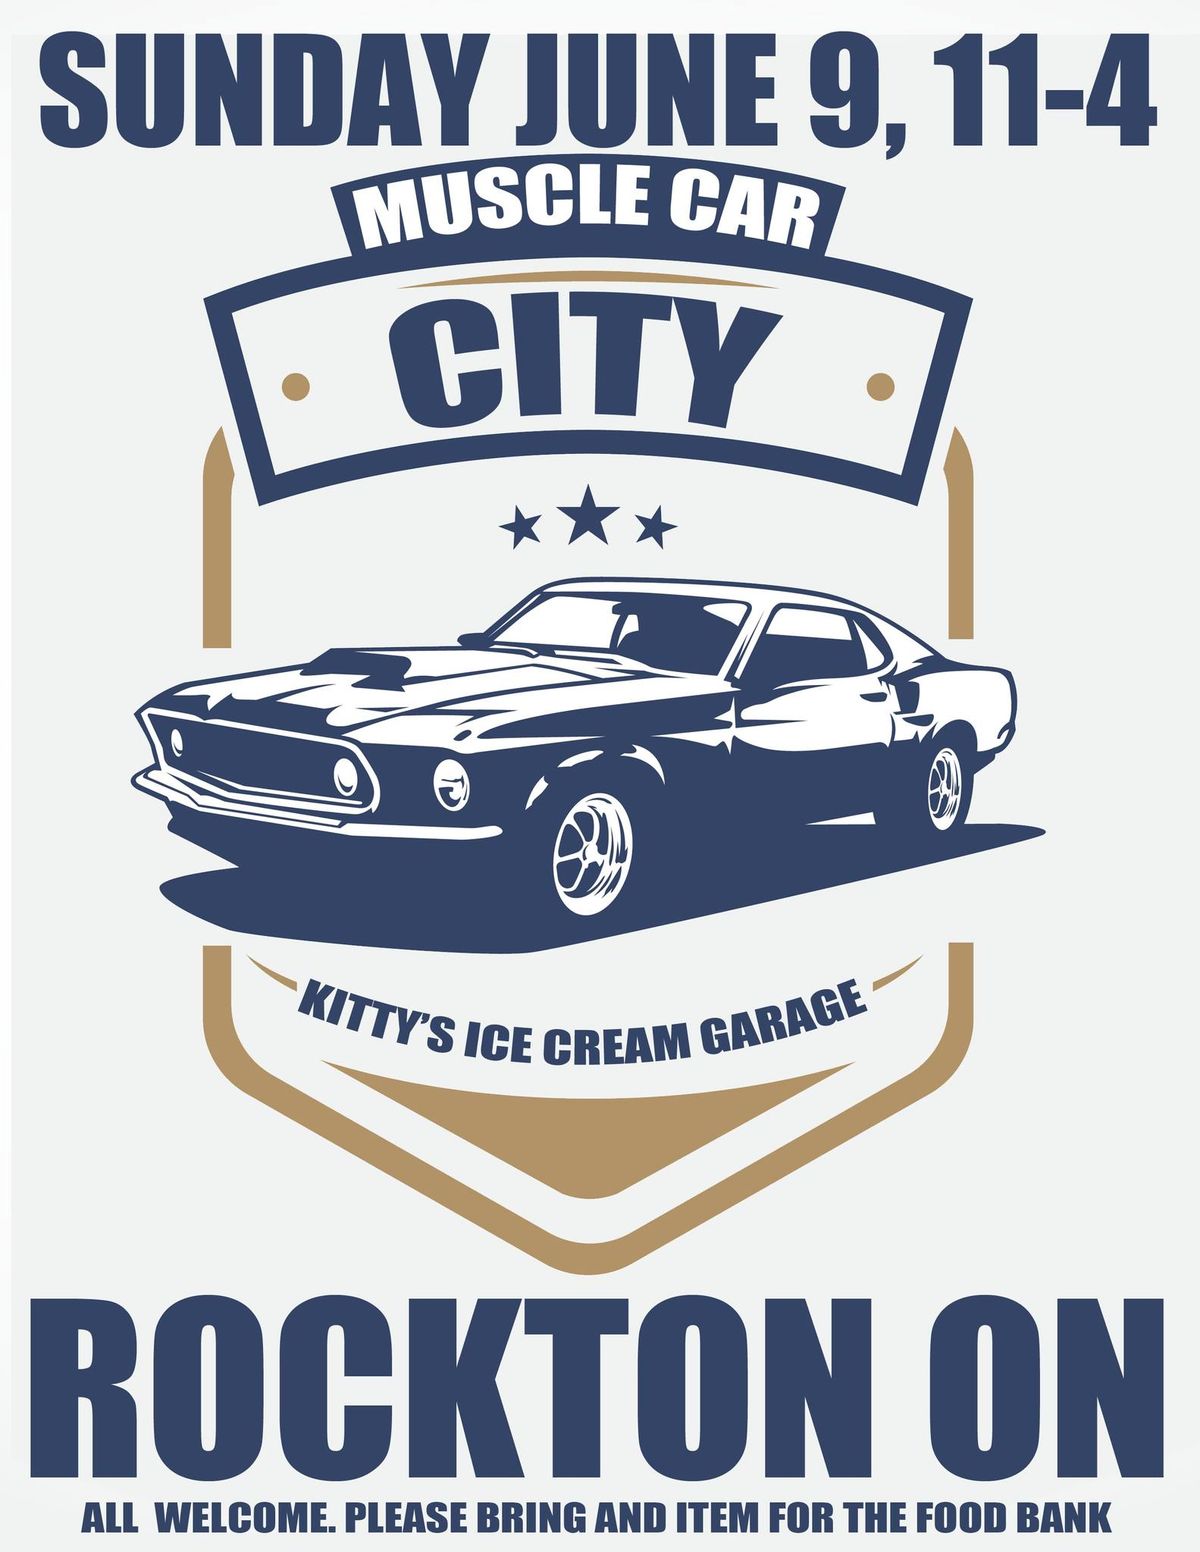 Kitty's Muscle Car City